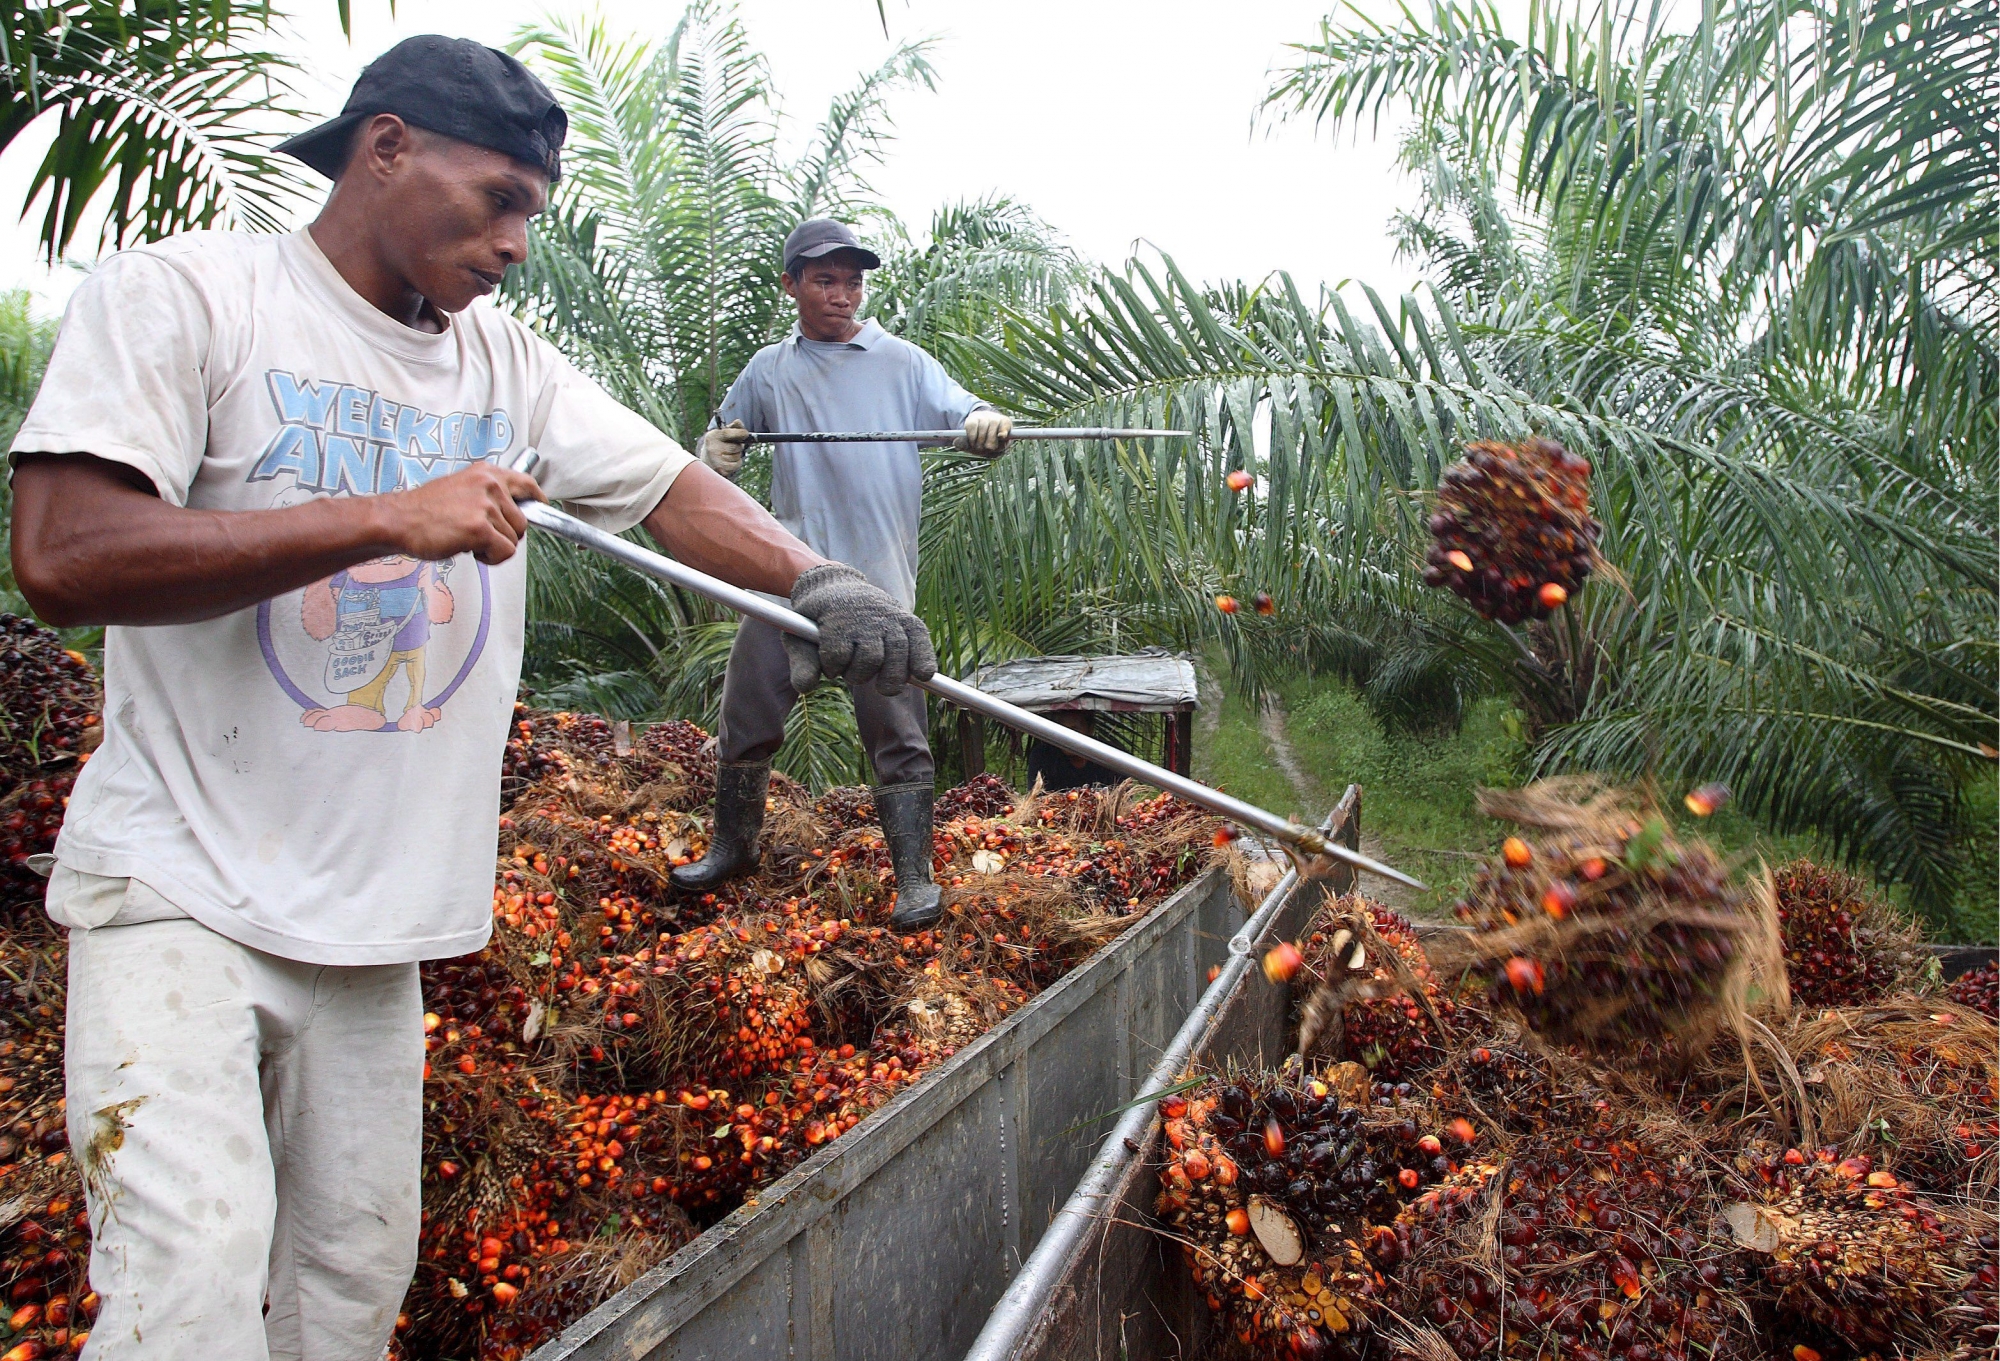 epa01190802 Wokers harvest oil-palm fruit bunches made up of black-orange, berry-like fruit nuts, near Tenom, in Sabah, part of Borneo, Malaysia, in this picture taken 27 November 2007.
Palm oil has long been used in a wide range of consumer products, from margarine to sweets and soaps to cosmetics, but since Europe and America have discovered palm oil as a biofuel, a cleaner-burning alternative to mineral oil, business has taken off. The cleaner oil comes with a dirty side - much rainforest in Borneo in both Malaysia and Indonesia is now slashed to make way for new oil-palm plantations. Malaysia and Indonesia are responsible for 80 per cent of global palm-oil production and consumption has more than doubled to more than 30 million tons each year in the past decade. Delegates, environmentalists and scientists from nearly 190 countries have started two weeks of meetings on Bali to set a deadline for replacing the Kyoto Protocol, the treaty aimed at fighting global warming that was signed 10 years ago and expires in 2012 with clean fuels and alternative energy high on the agenda. EPA/BARBARA WALTON